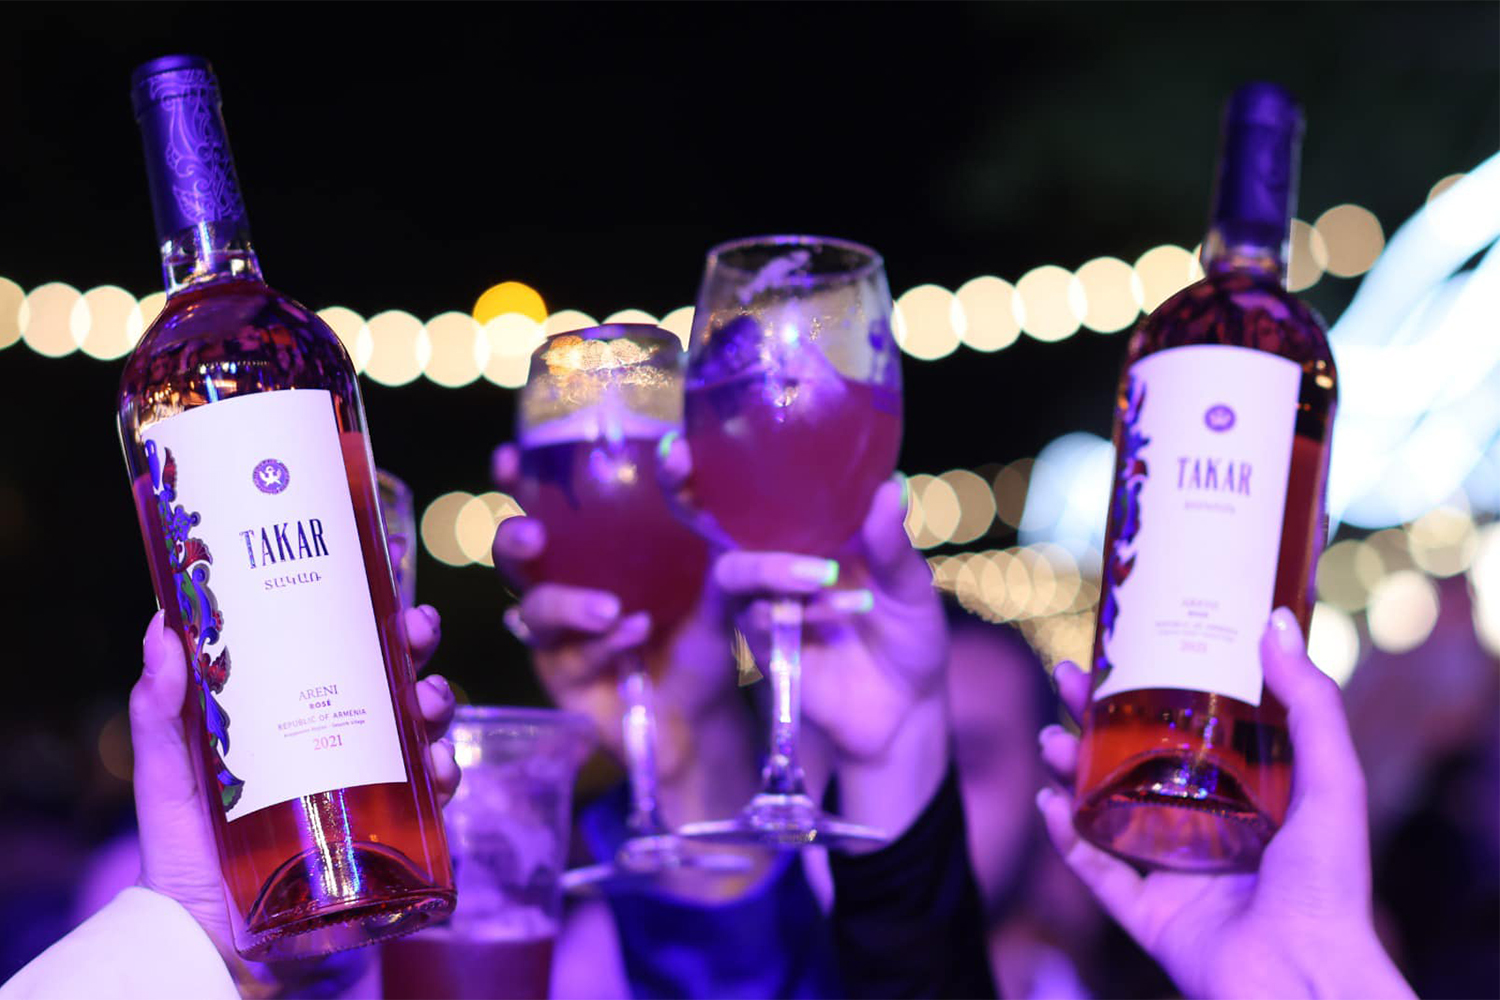 New wines, live music and the brightest colors of Armenian culture at the Armenia Wine pavilion 